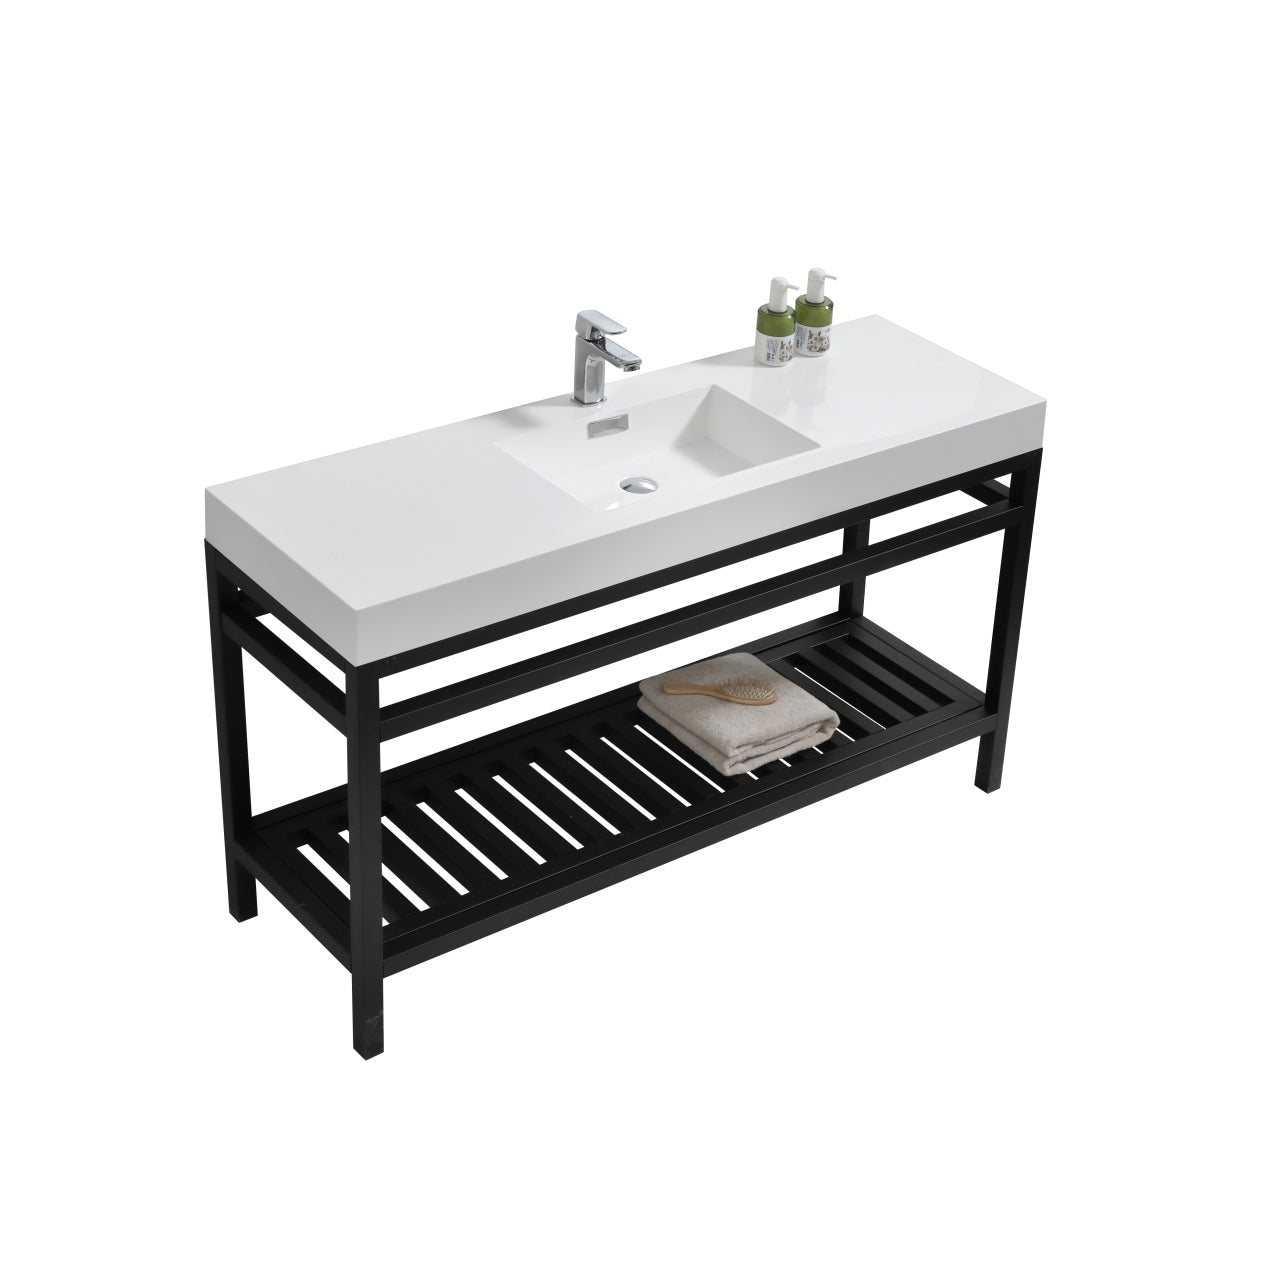 Cisco 60" Single Sink Stainless Steel Console with Acrylic Sink - Home and Bath Depot